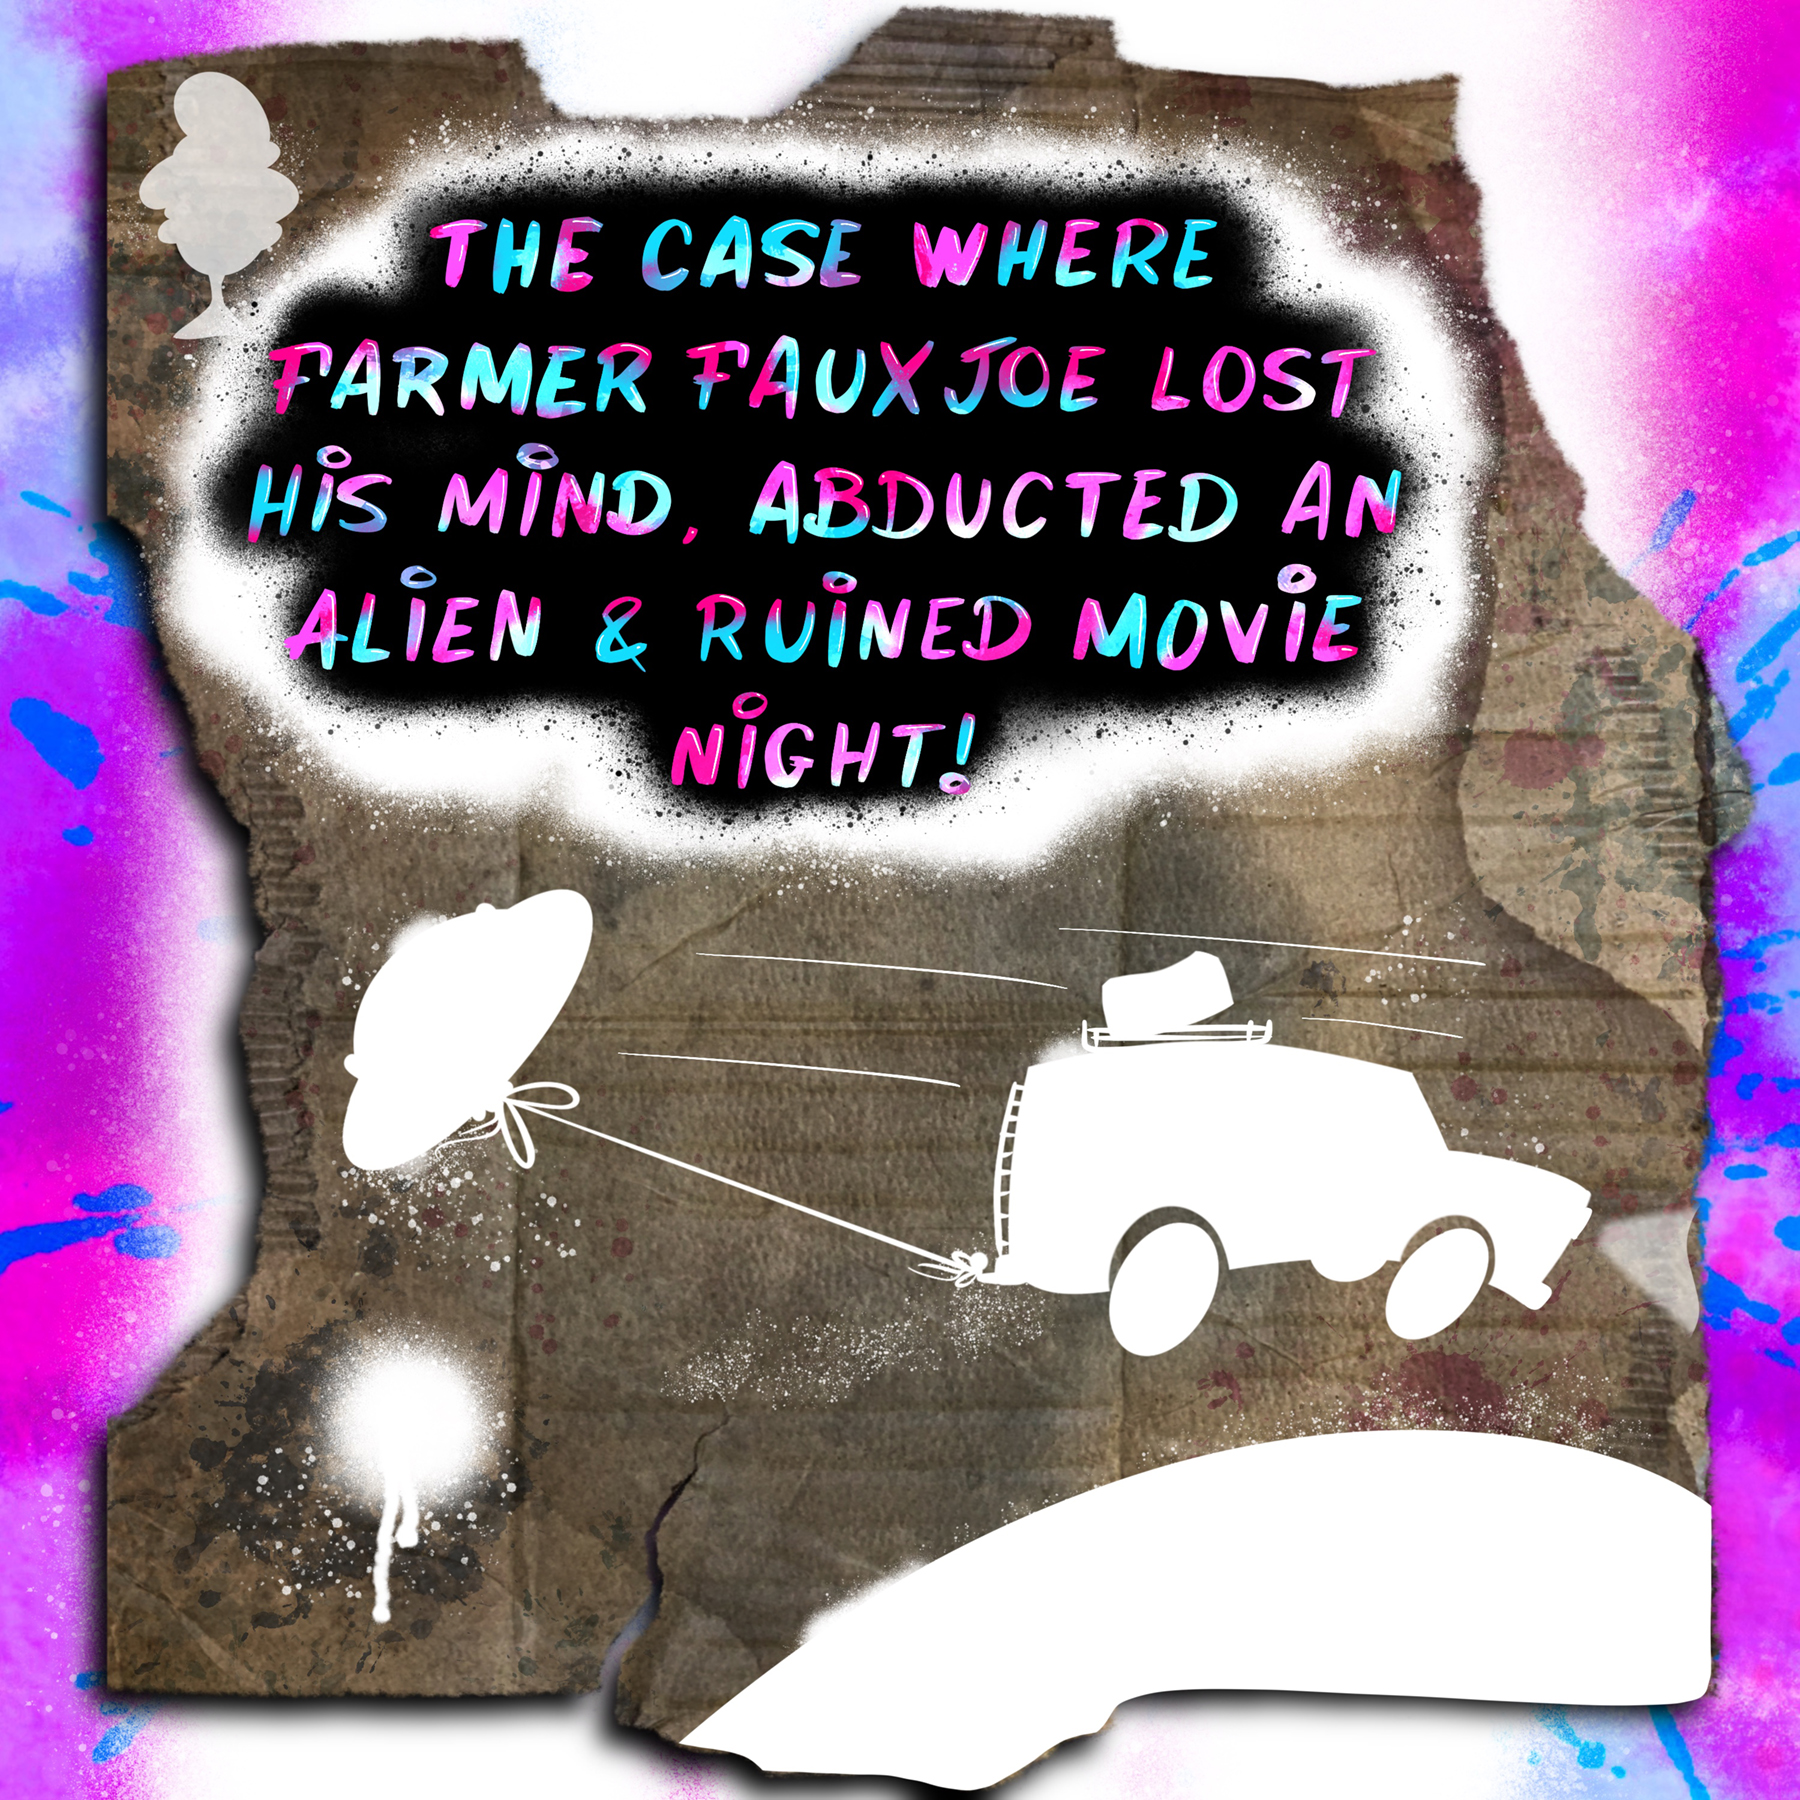 Page from the book The Mudsuckle Ritual "The Case Where Farmer Fauxjoe lost his mind, abducted an alien & ruined movie night!", image courtesy of the artist